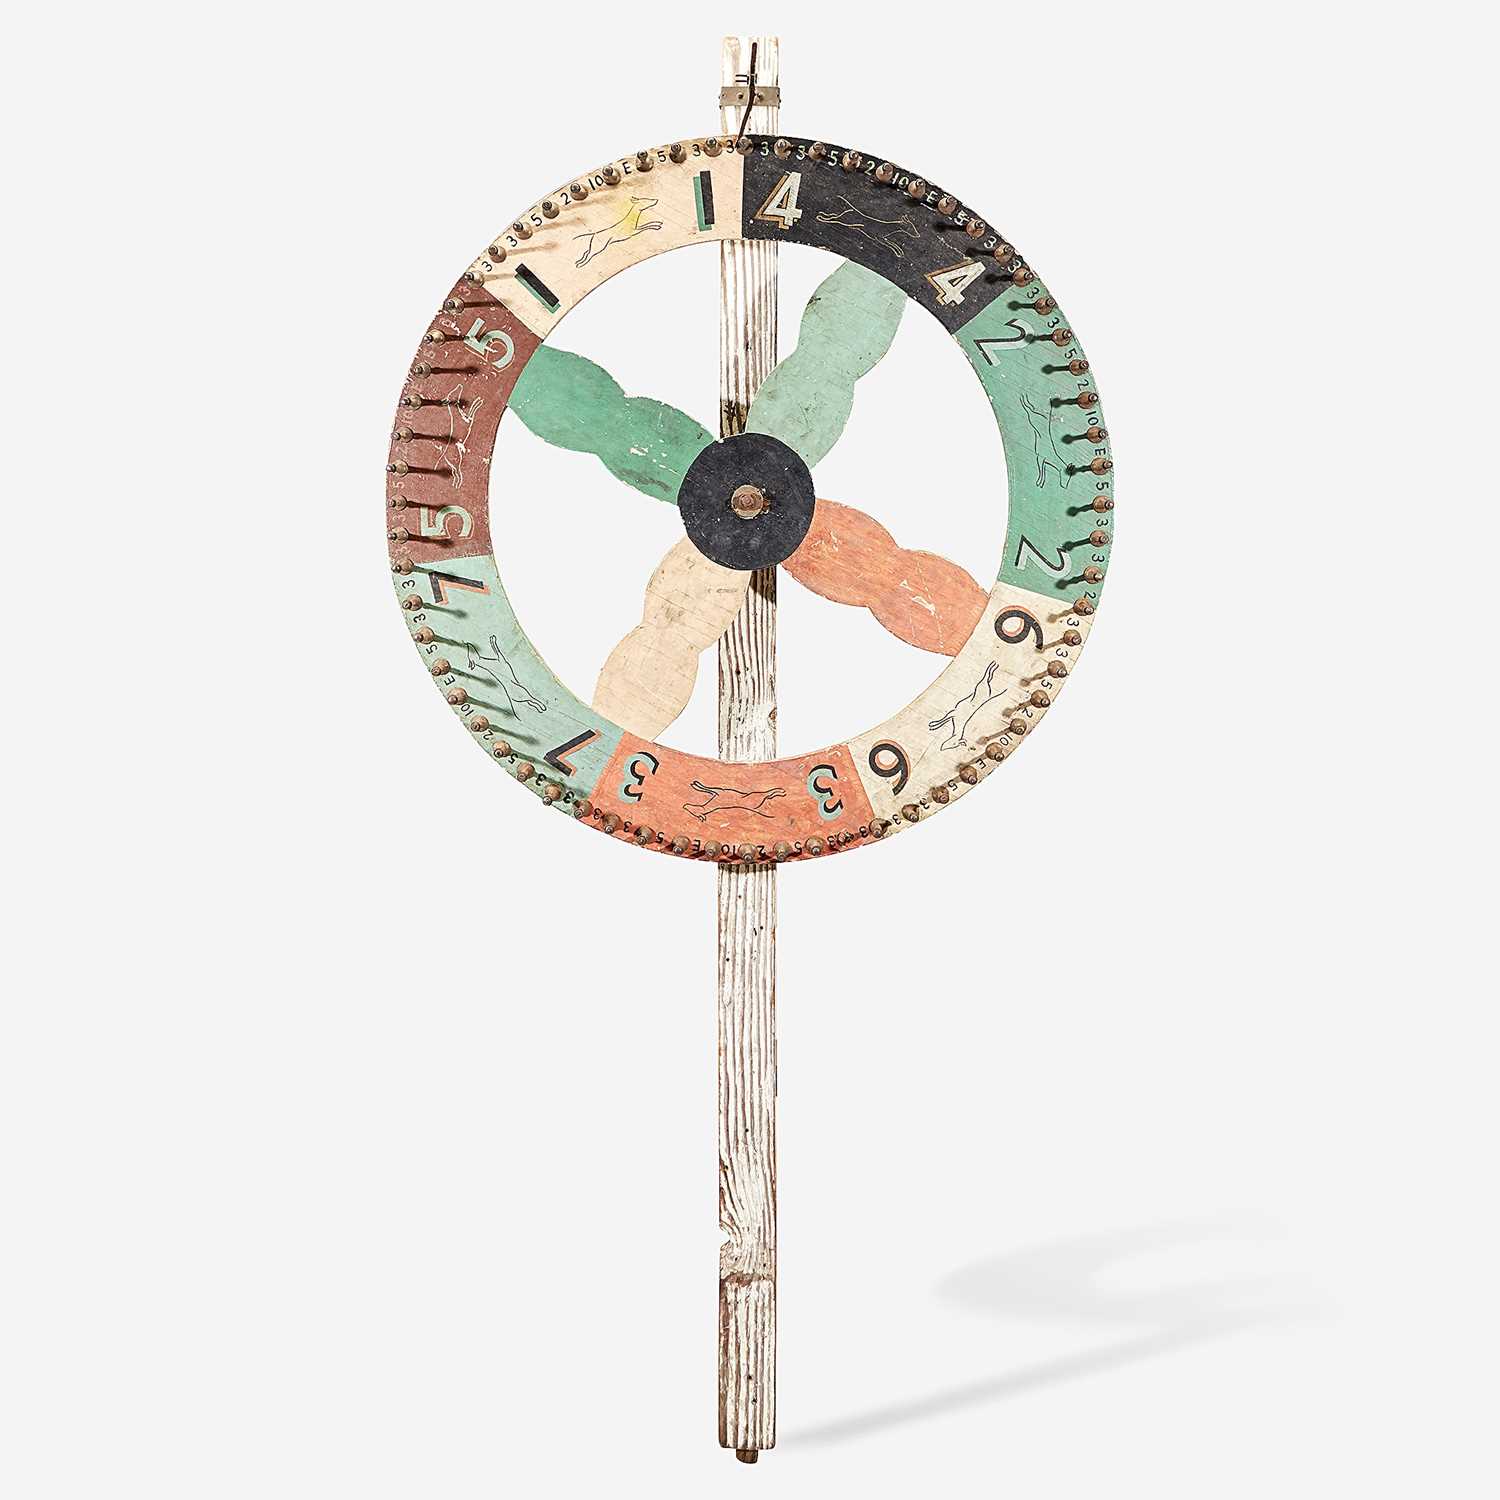 Lot 252 - A painted carnival wheel with stenciled figures of Pit bulls